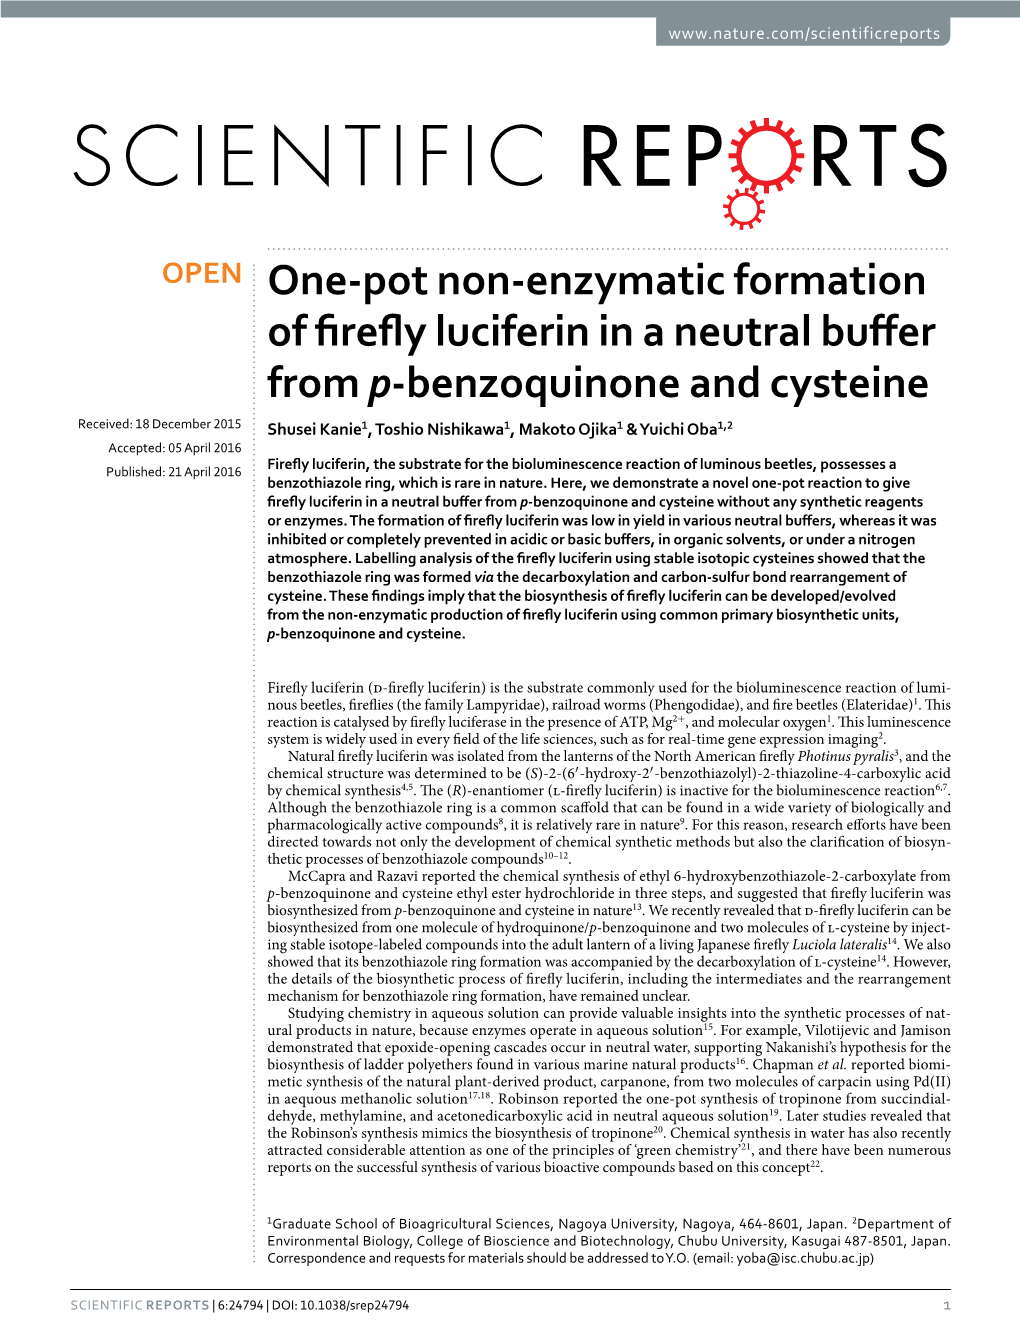 One-Pot Non-Enzymatic Formation of Firefly Luciferin in a Neutral Buffer